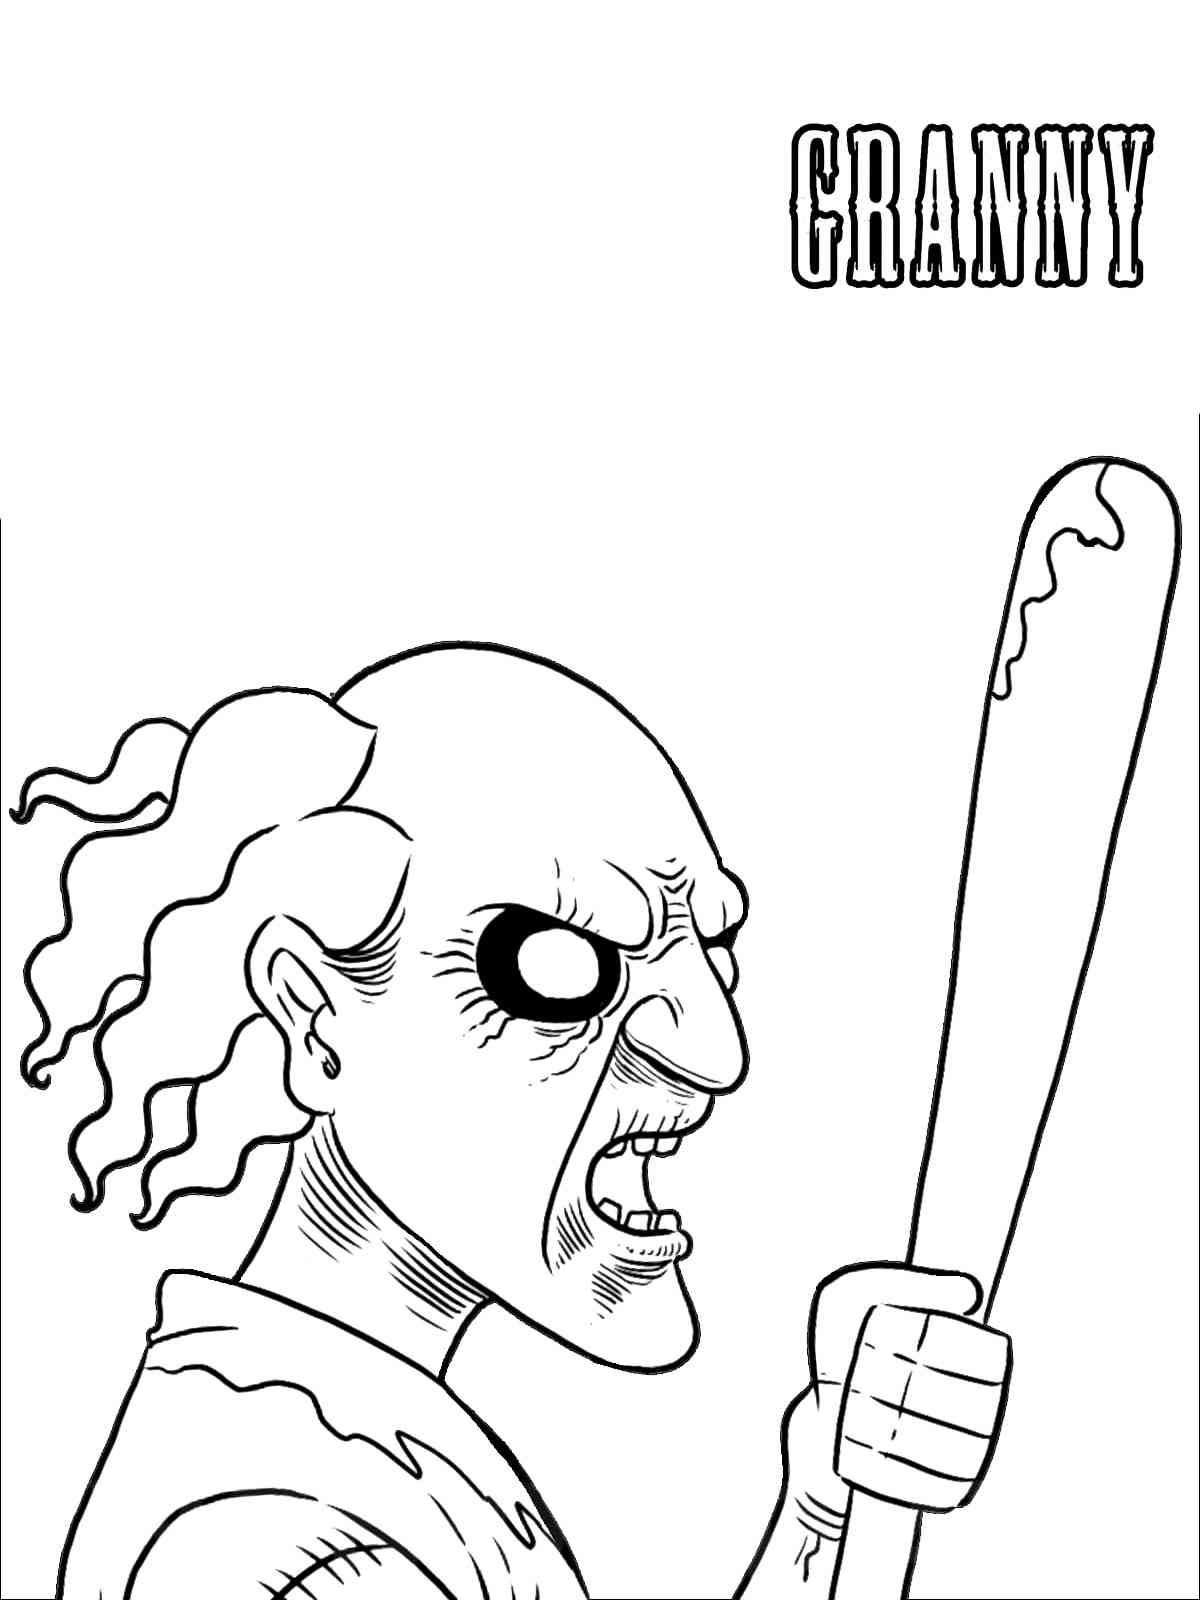 Granny with a bat coloring page